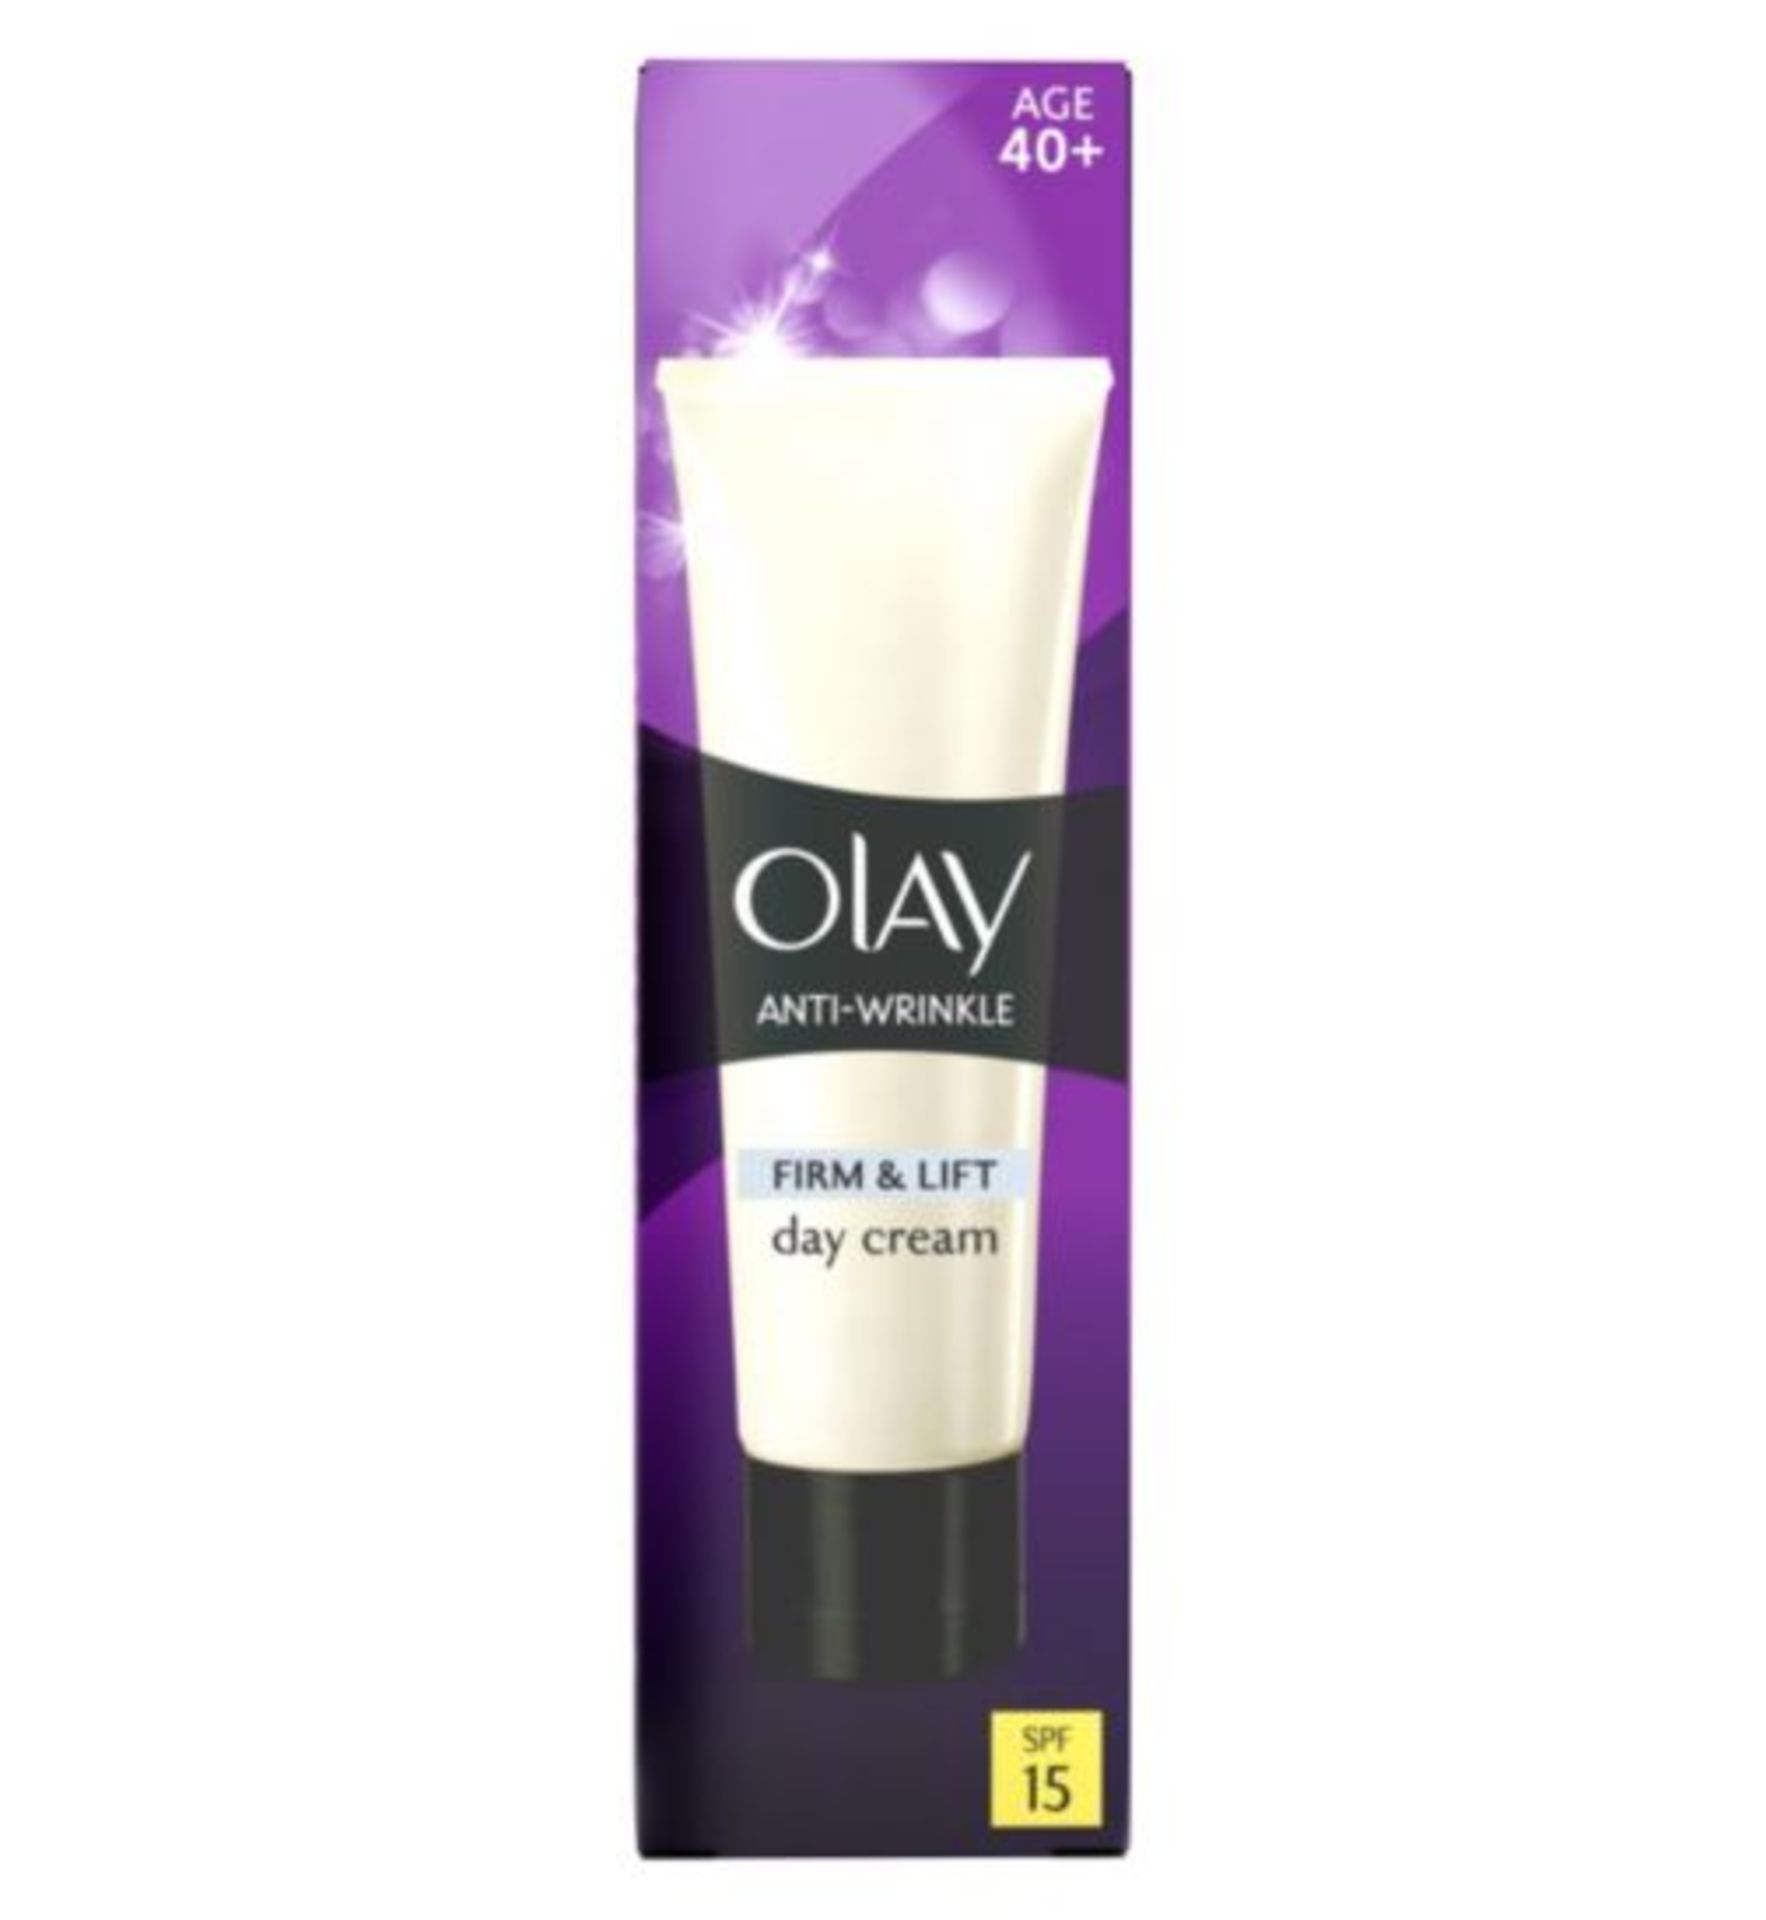 V  Grade A Olay Anti-Wrinkle firm and lift day cream SPF 15 Aged 40+ X  2  Bid price to be - Image 2 of 2